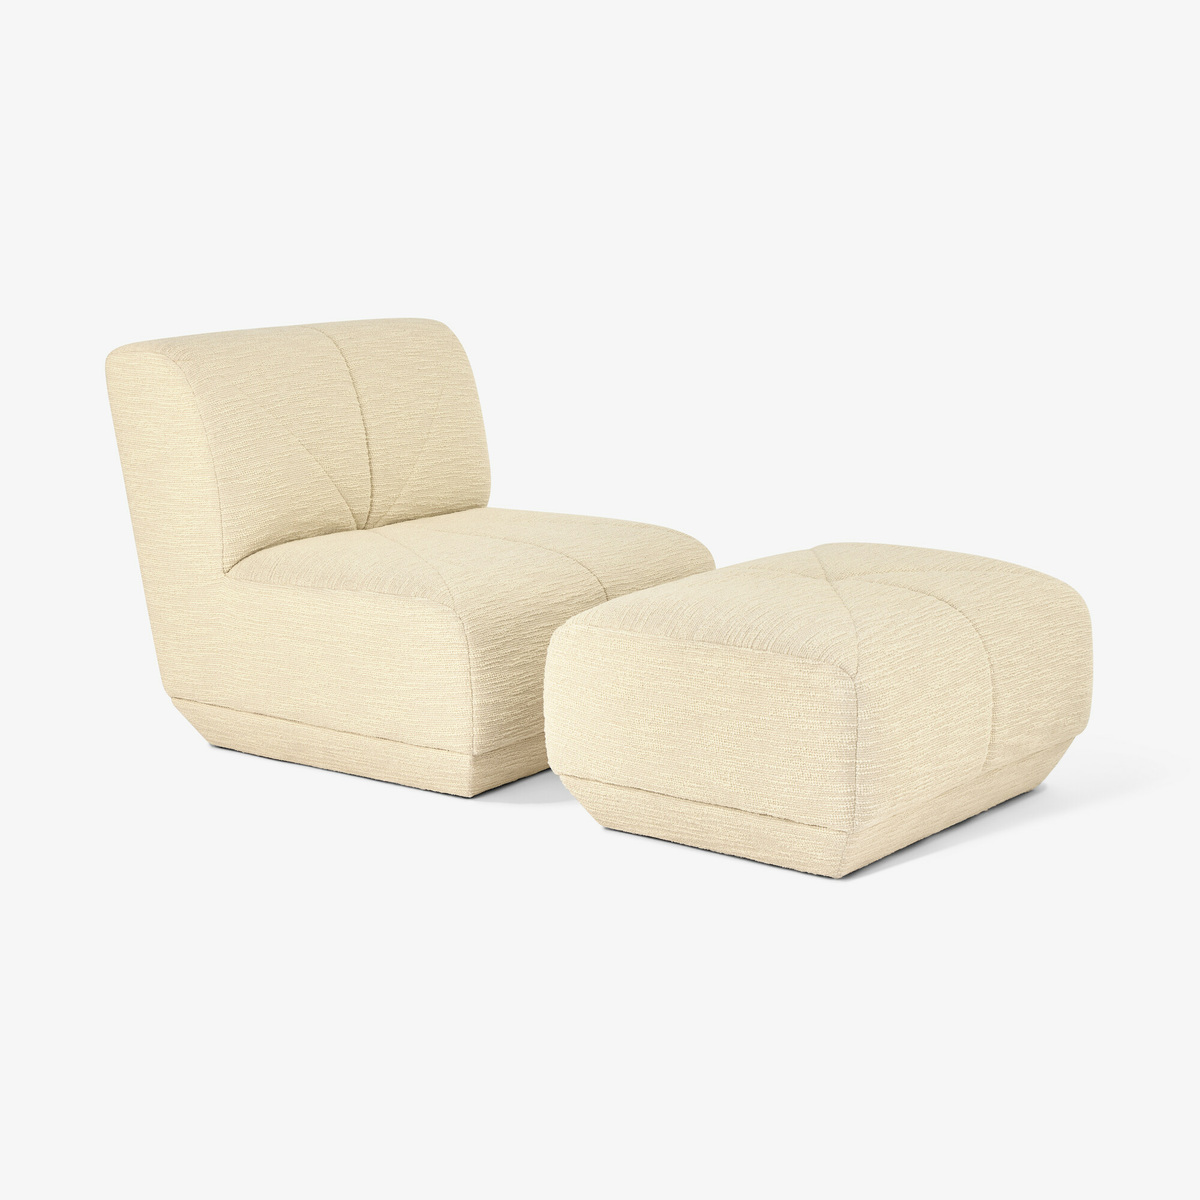 Chill Armchair, Off-White - Curl fabric - image 10